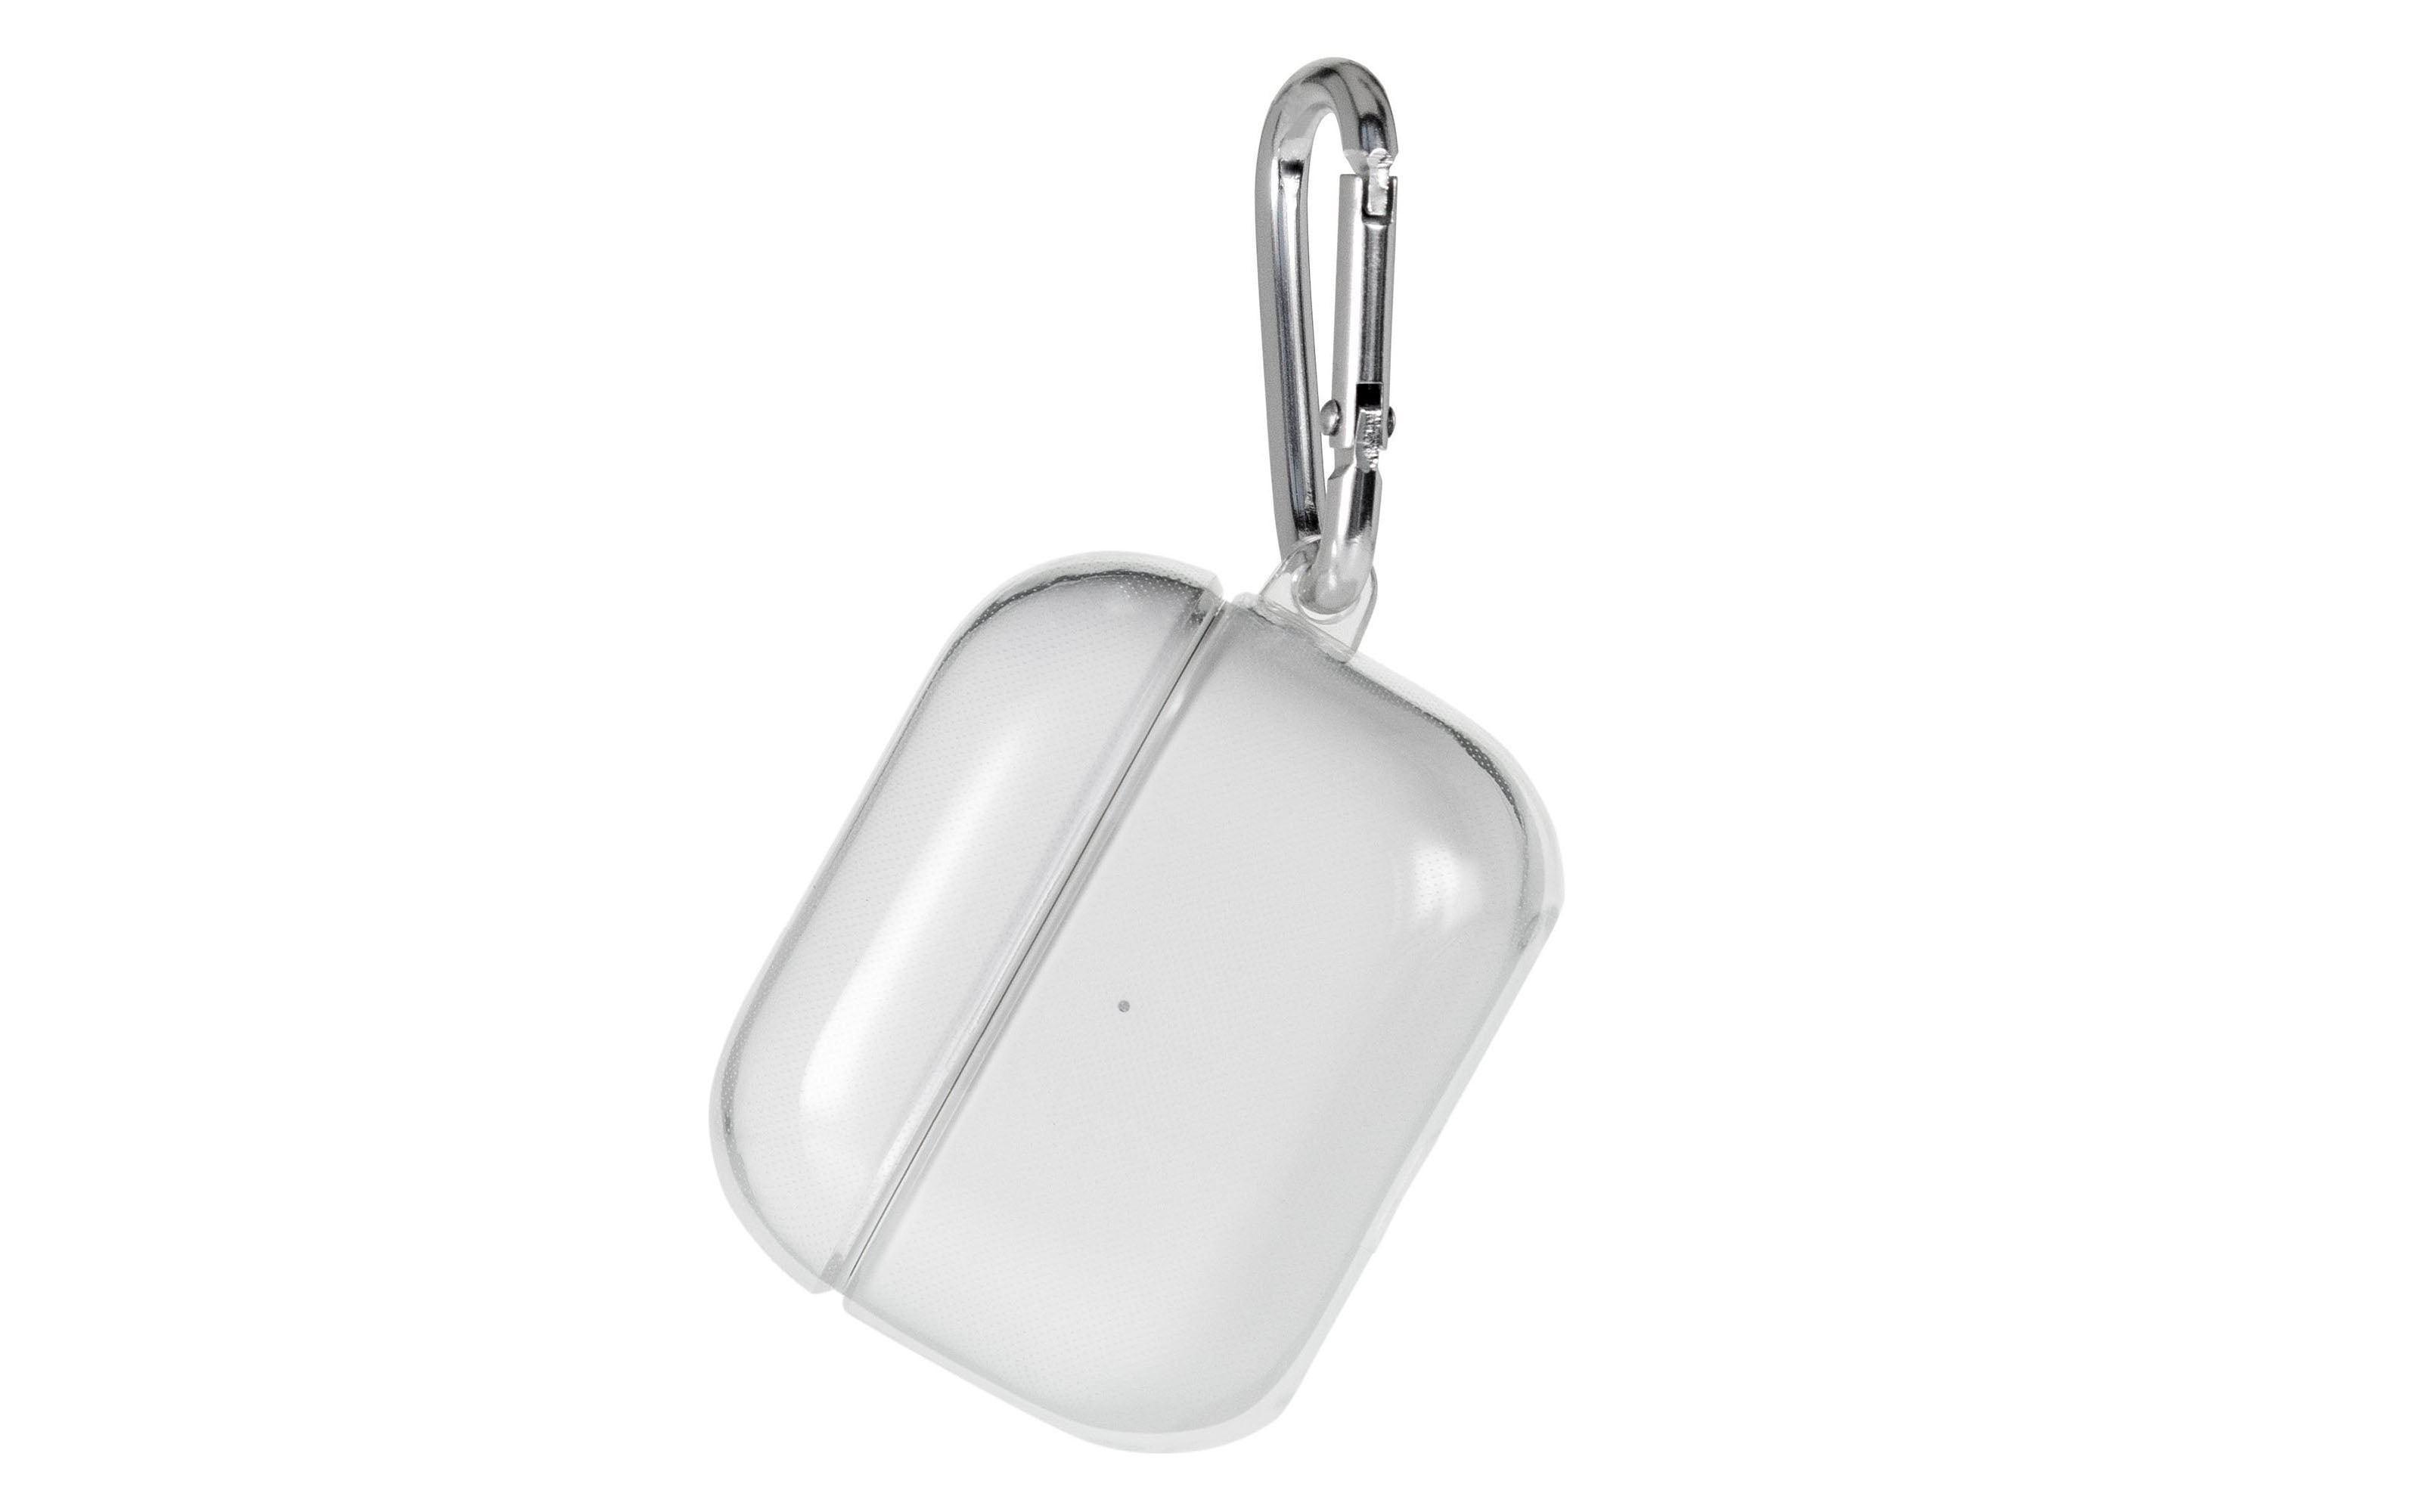 Torrii Bonjelly Case For Airpod 3 - Clear